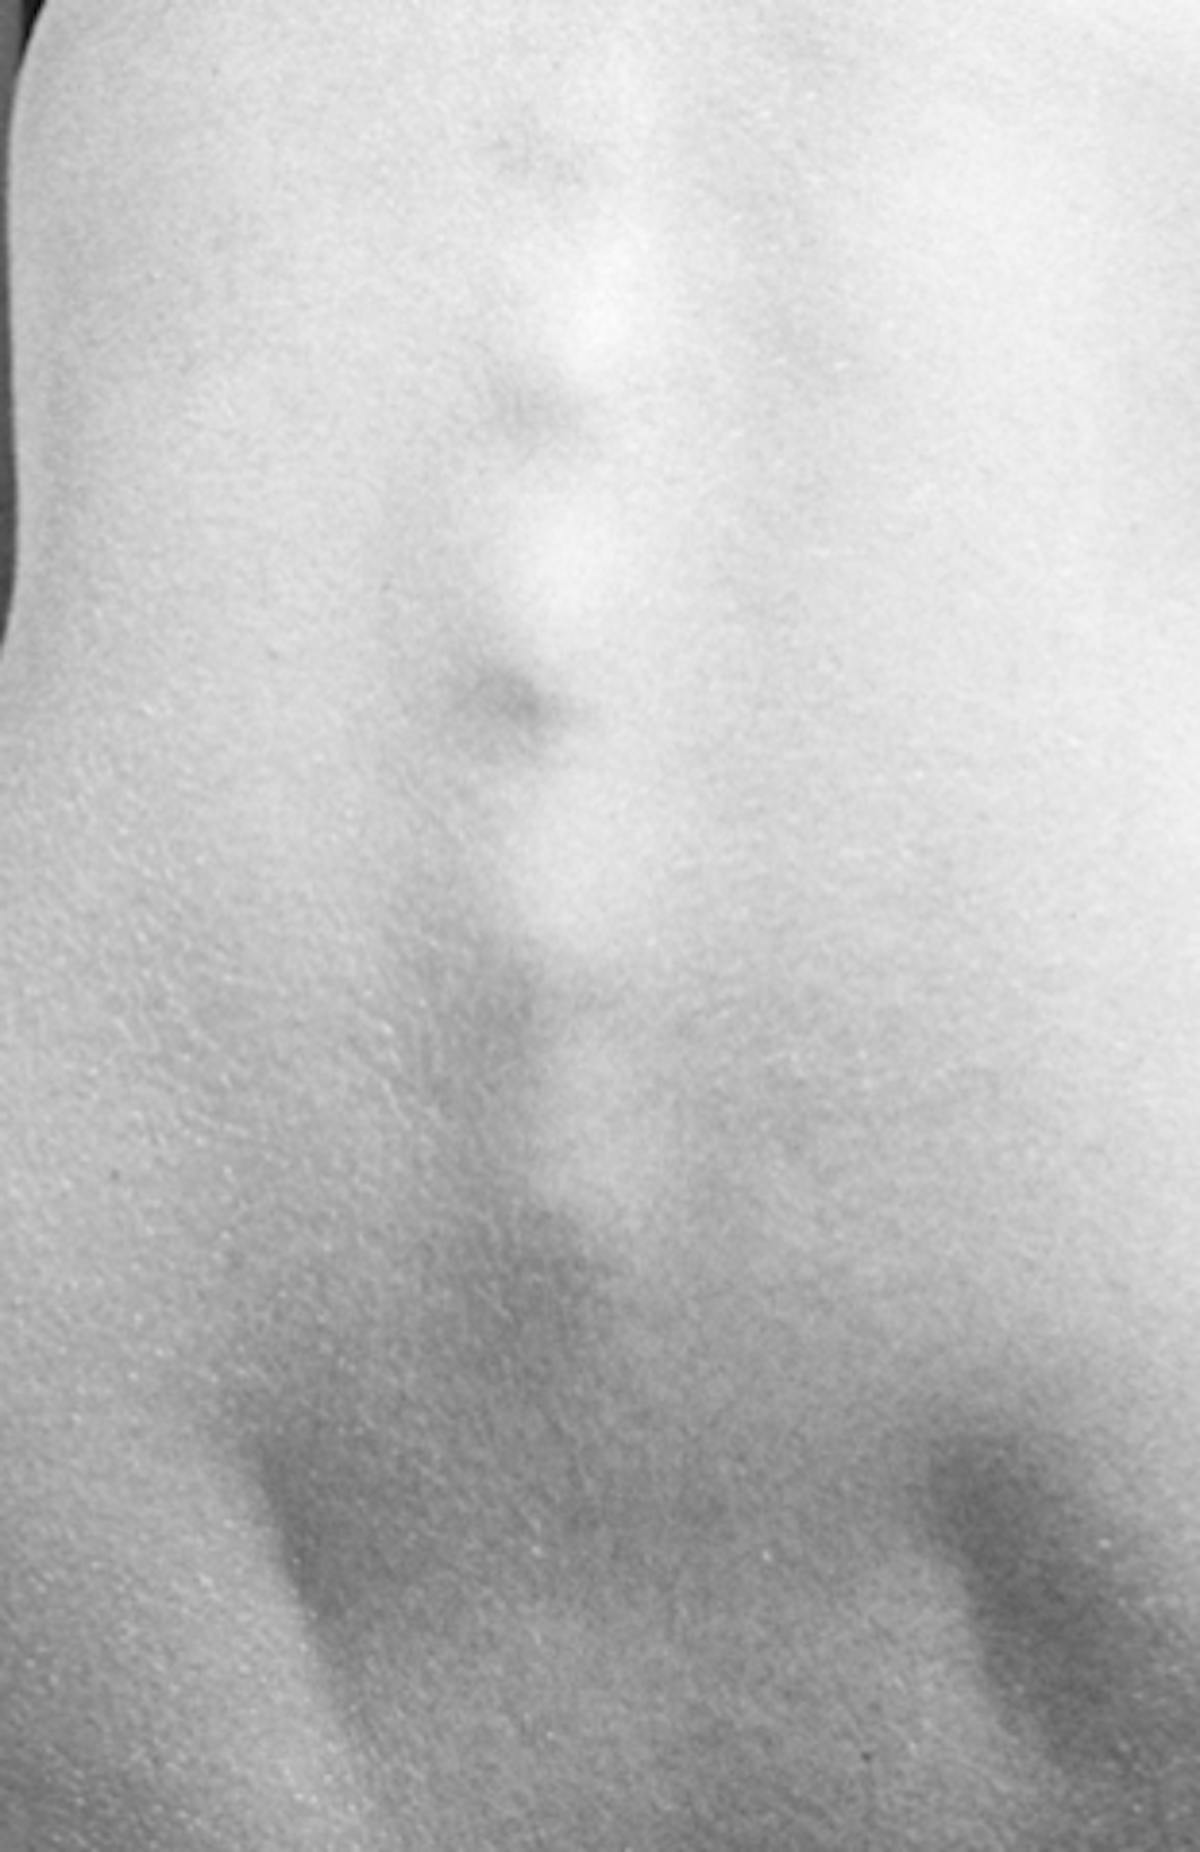 Picture in black and white of a bodypart